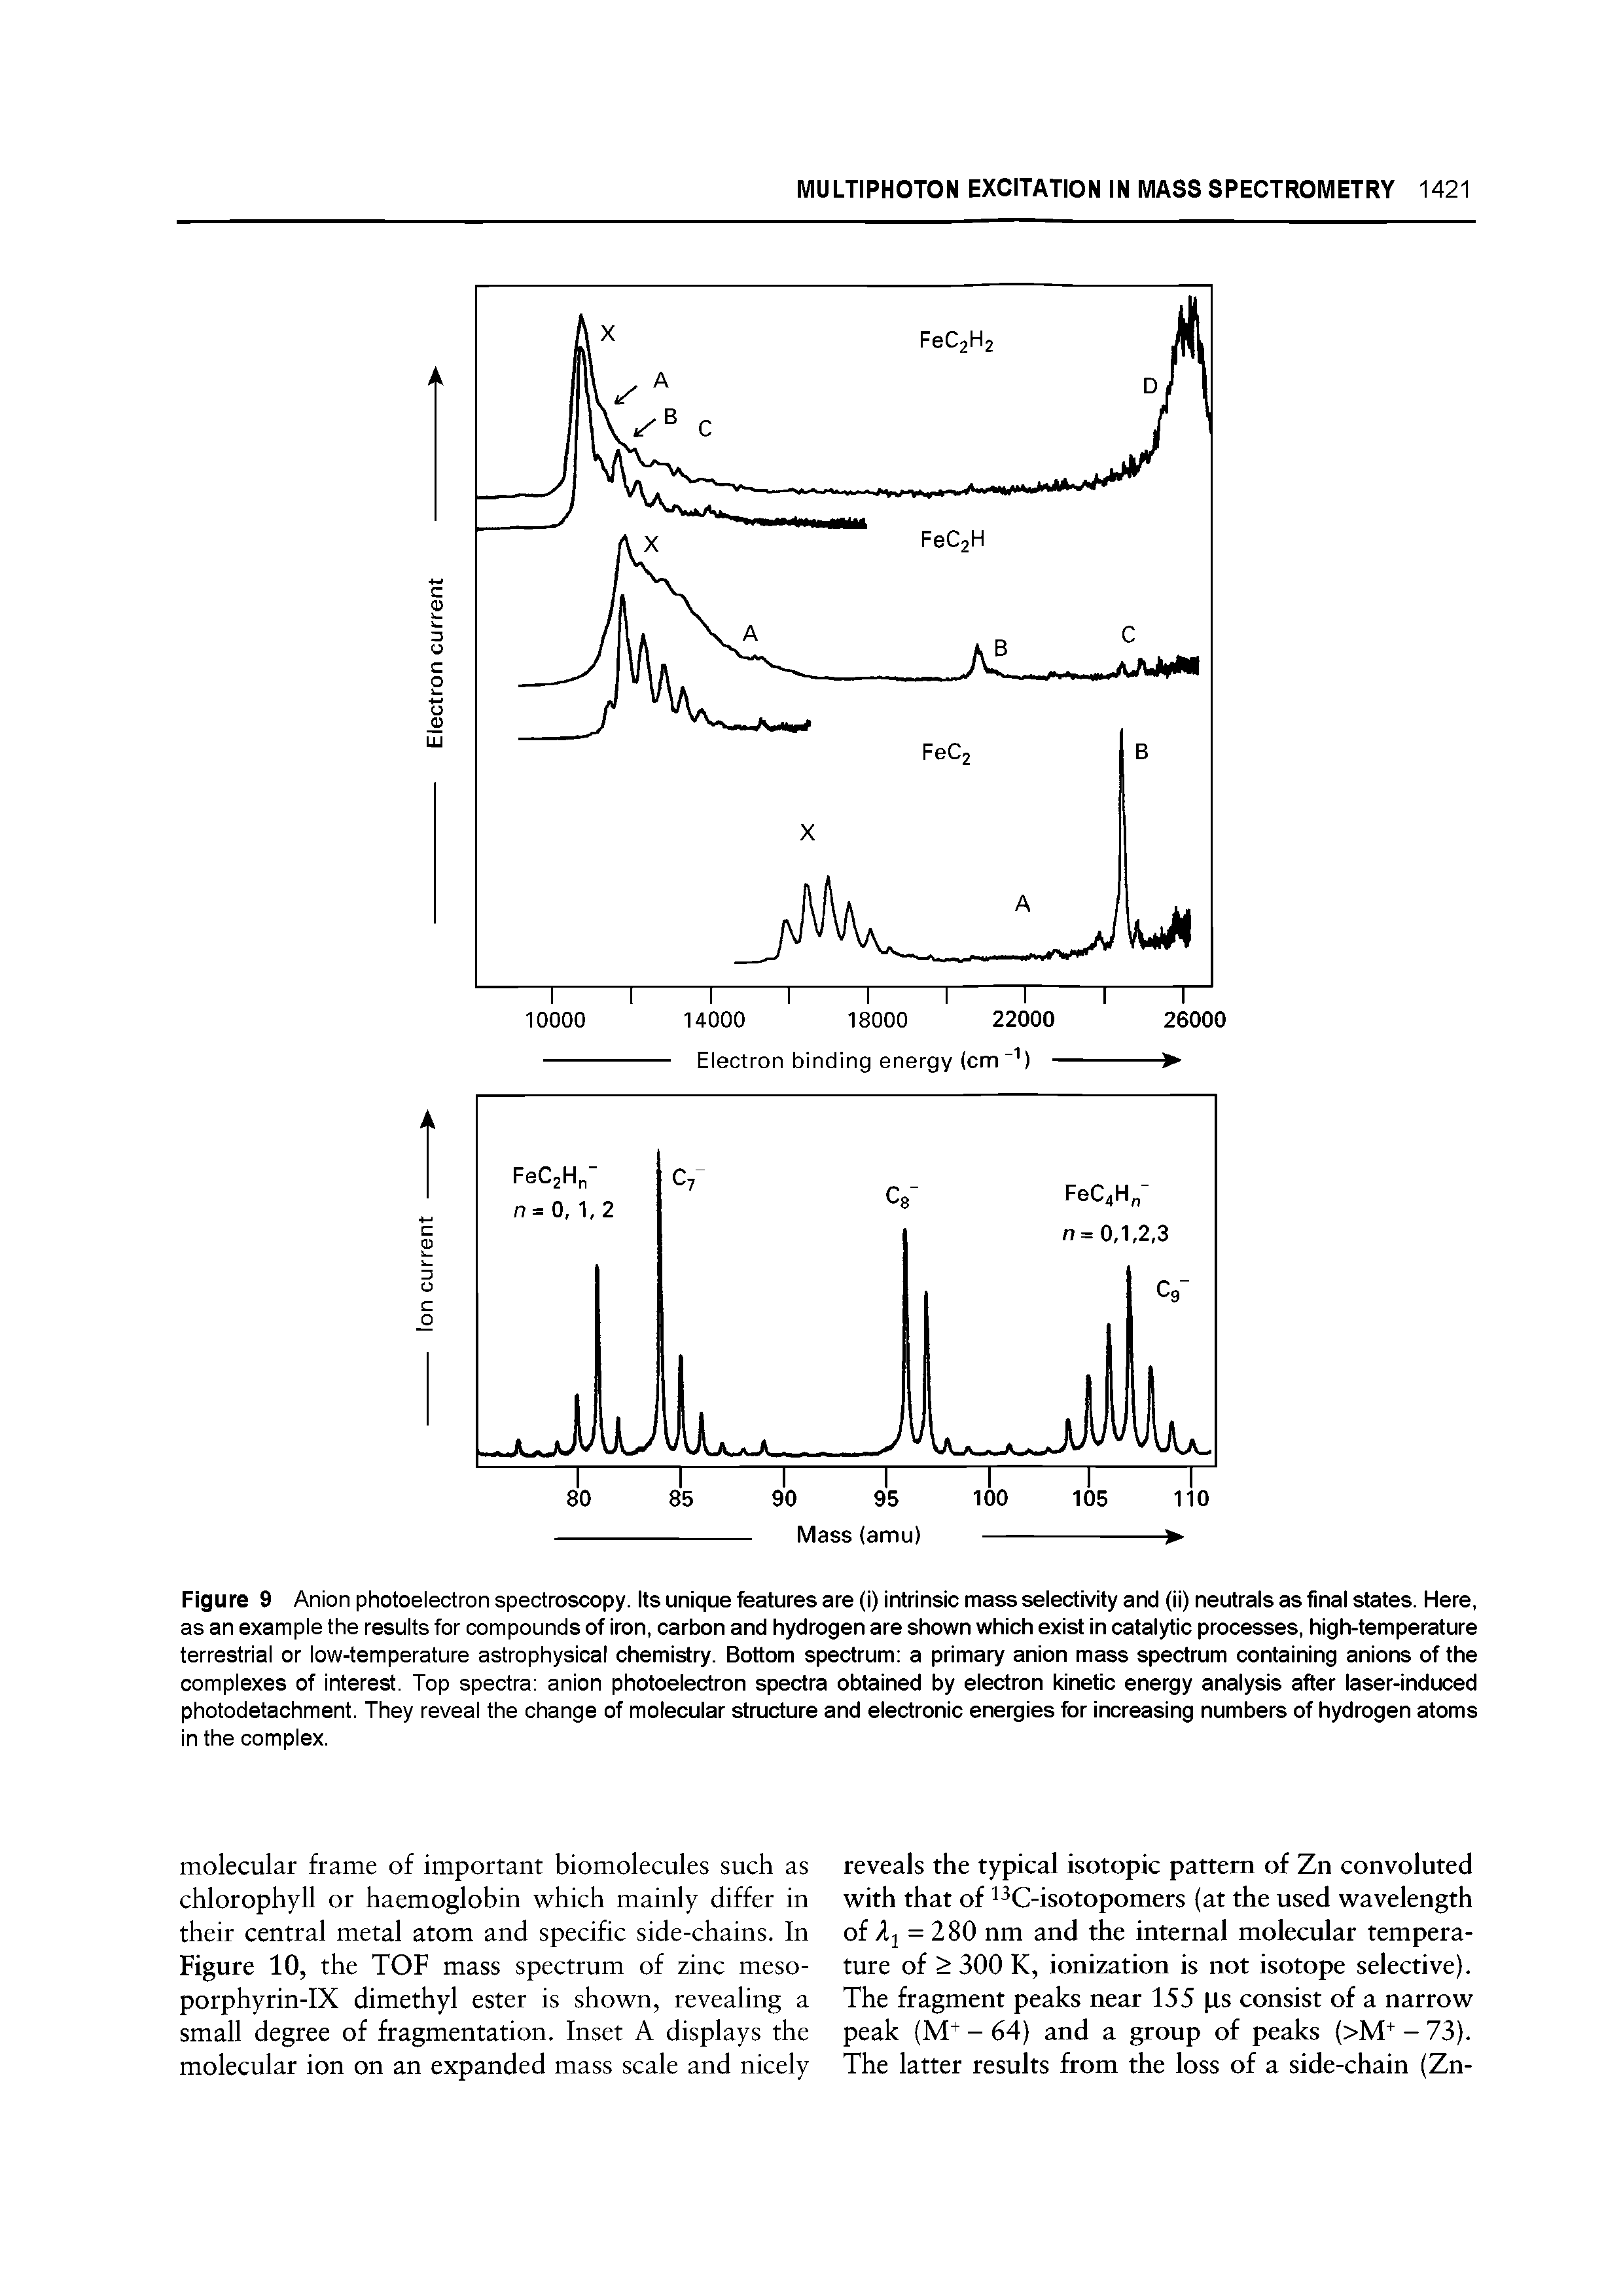 Figure 9 Anion photoelectron spectroscopy. Its unique features are (I) Intrinsic mass selectivity and (ii) neutrals as final states. Here, as an example the results for compounds of iron, carbon and hydrogen are shown which exist in catalytic processes, high-temperature terrestrial or low-temperature astrophysical chemistry. Bottom spectrum a primary anion mass spectrum containing anions of the complexes of interest. Top spectra anion photoelectron spectra obtained by electron kinetic energy analysis after laser-induced photodetachment. They reveal the change of molecular structure and electronic energies for increasing numbers of hydrogen atoms in the complex.